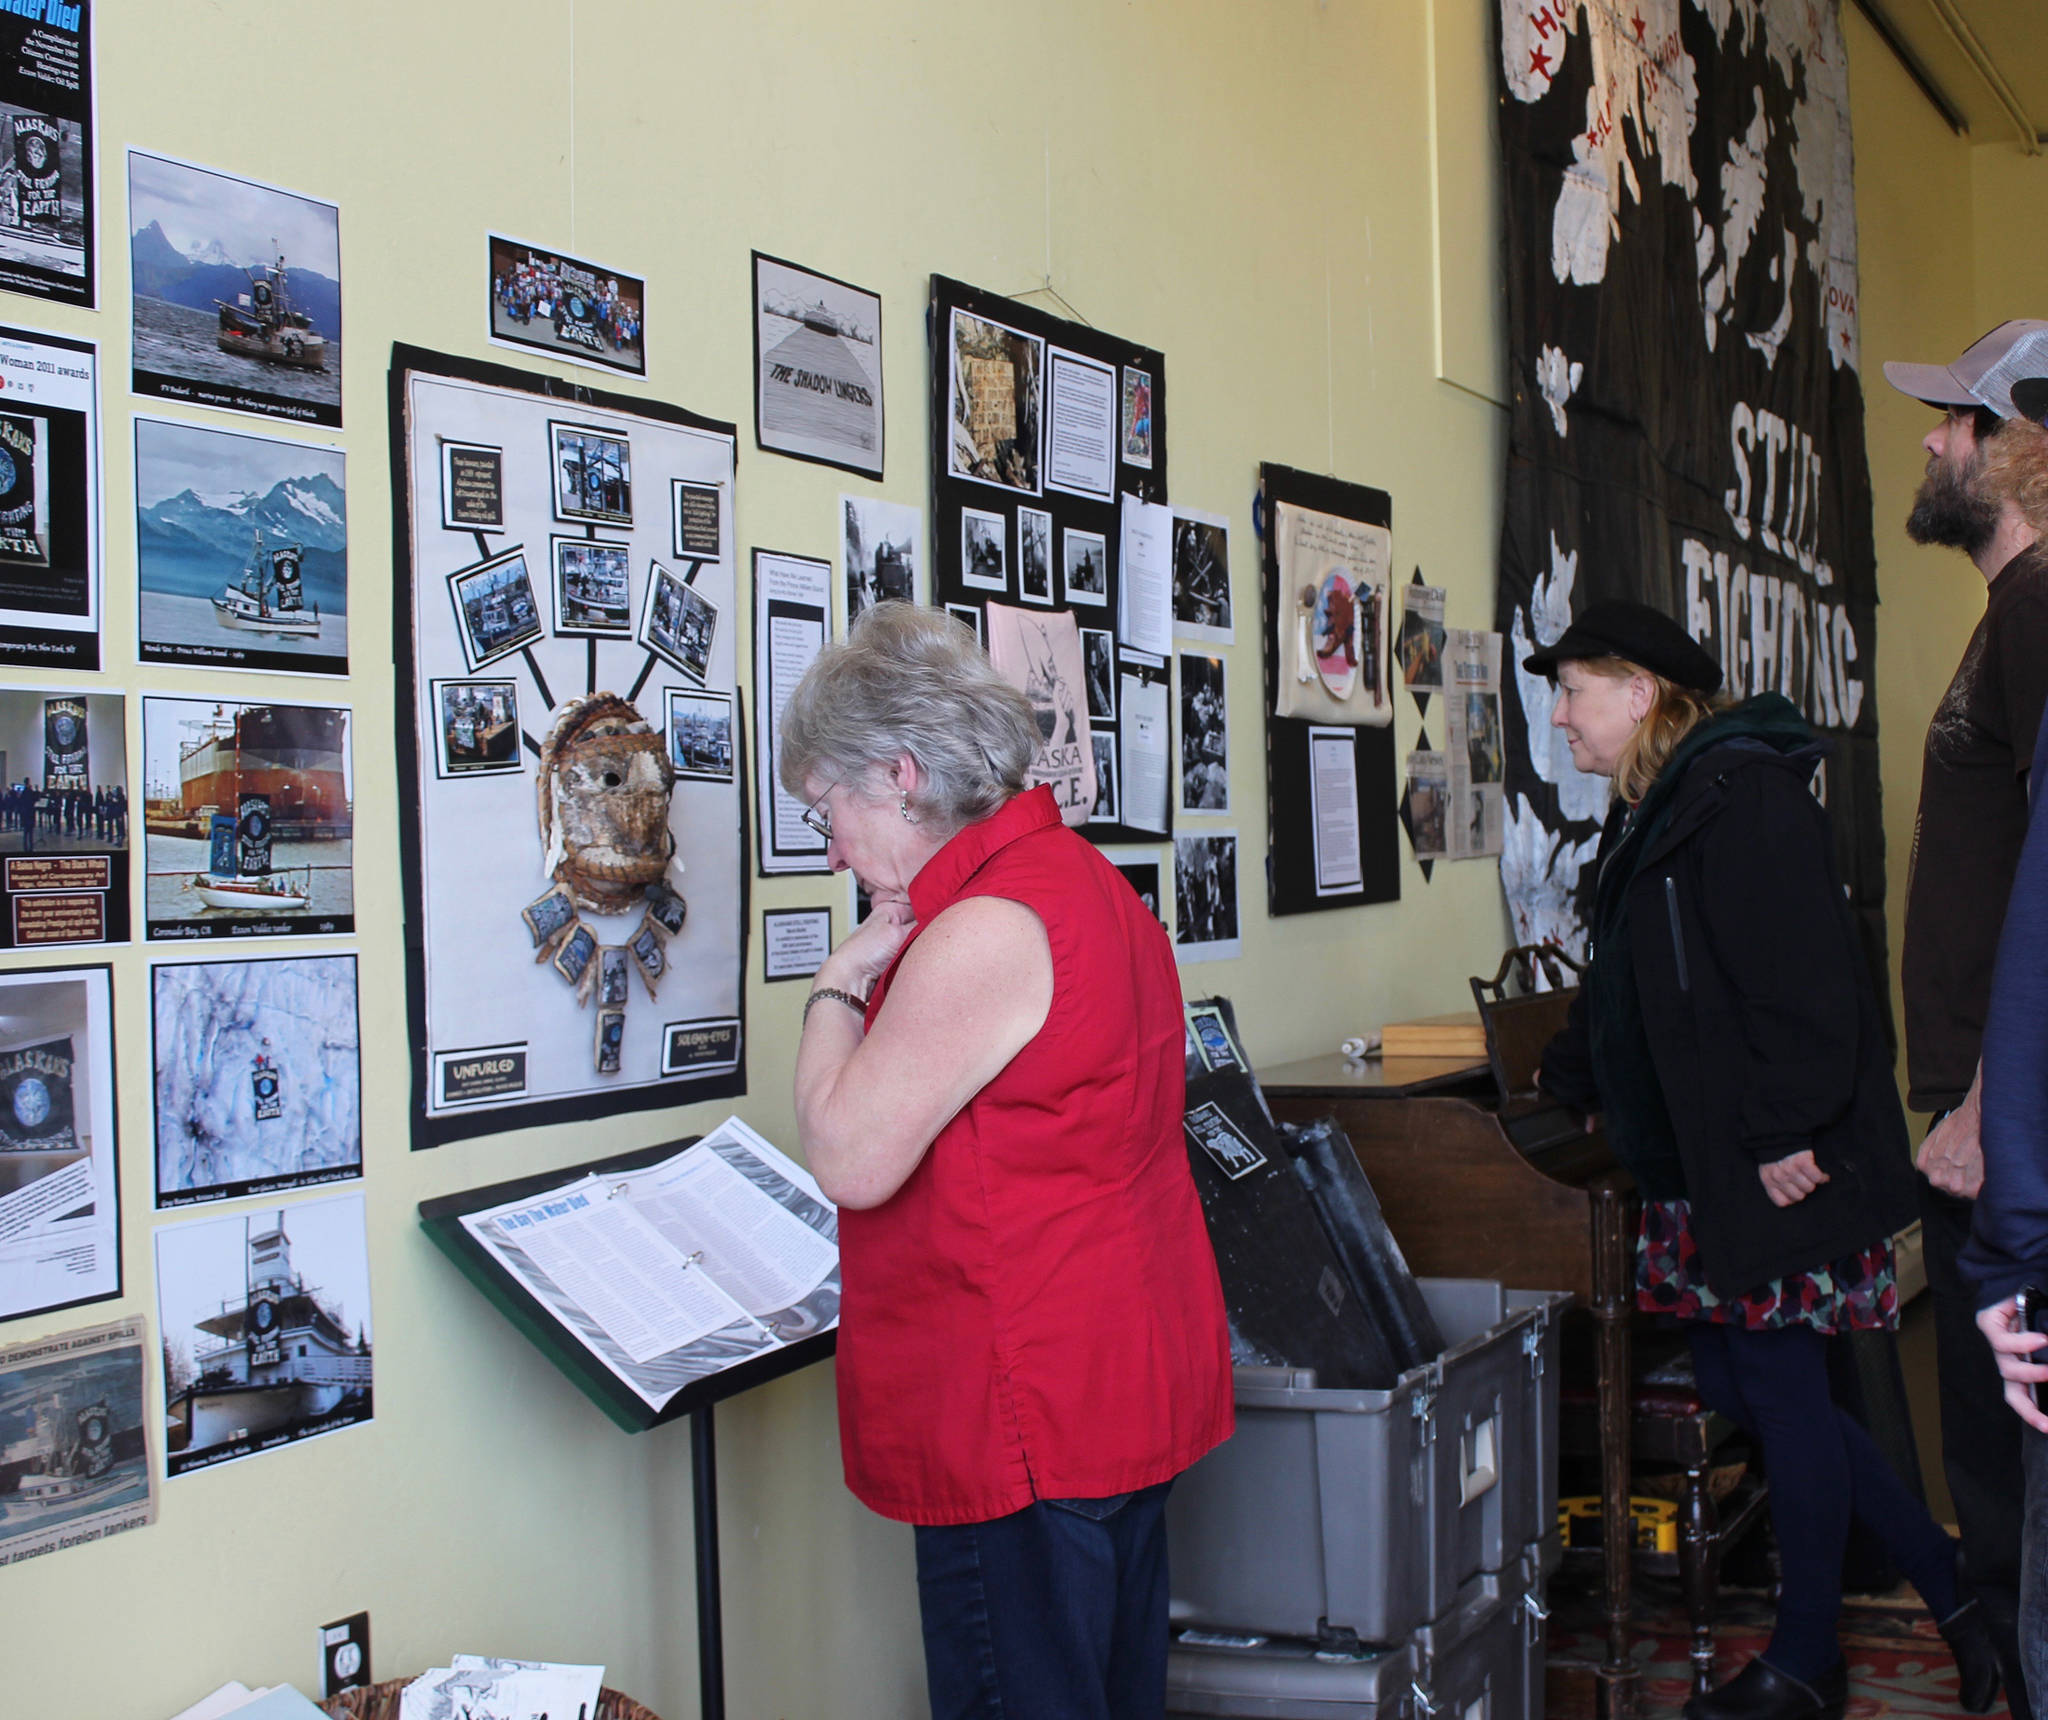 Roberta Highland, Sue Christiansen, and Jason Weir examine “spill-mobelia” included in “Still Fighting,” an exhibit by Homer artivist Mavis Muller Saturday, March 23, 2019 on display at KBay Caffe in Homer, Alaska. The exhibit recalls the Exxon Valdez oil spill of March 24, 1989, and the response of locals and visitors to protect wildlife and beaches. (Photo by McKibben Jackinsky)